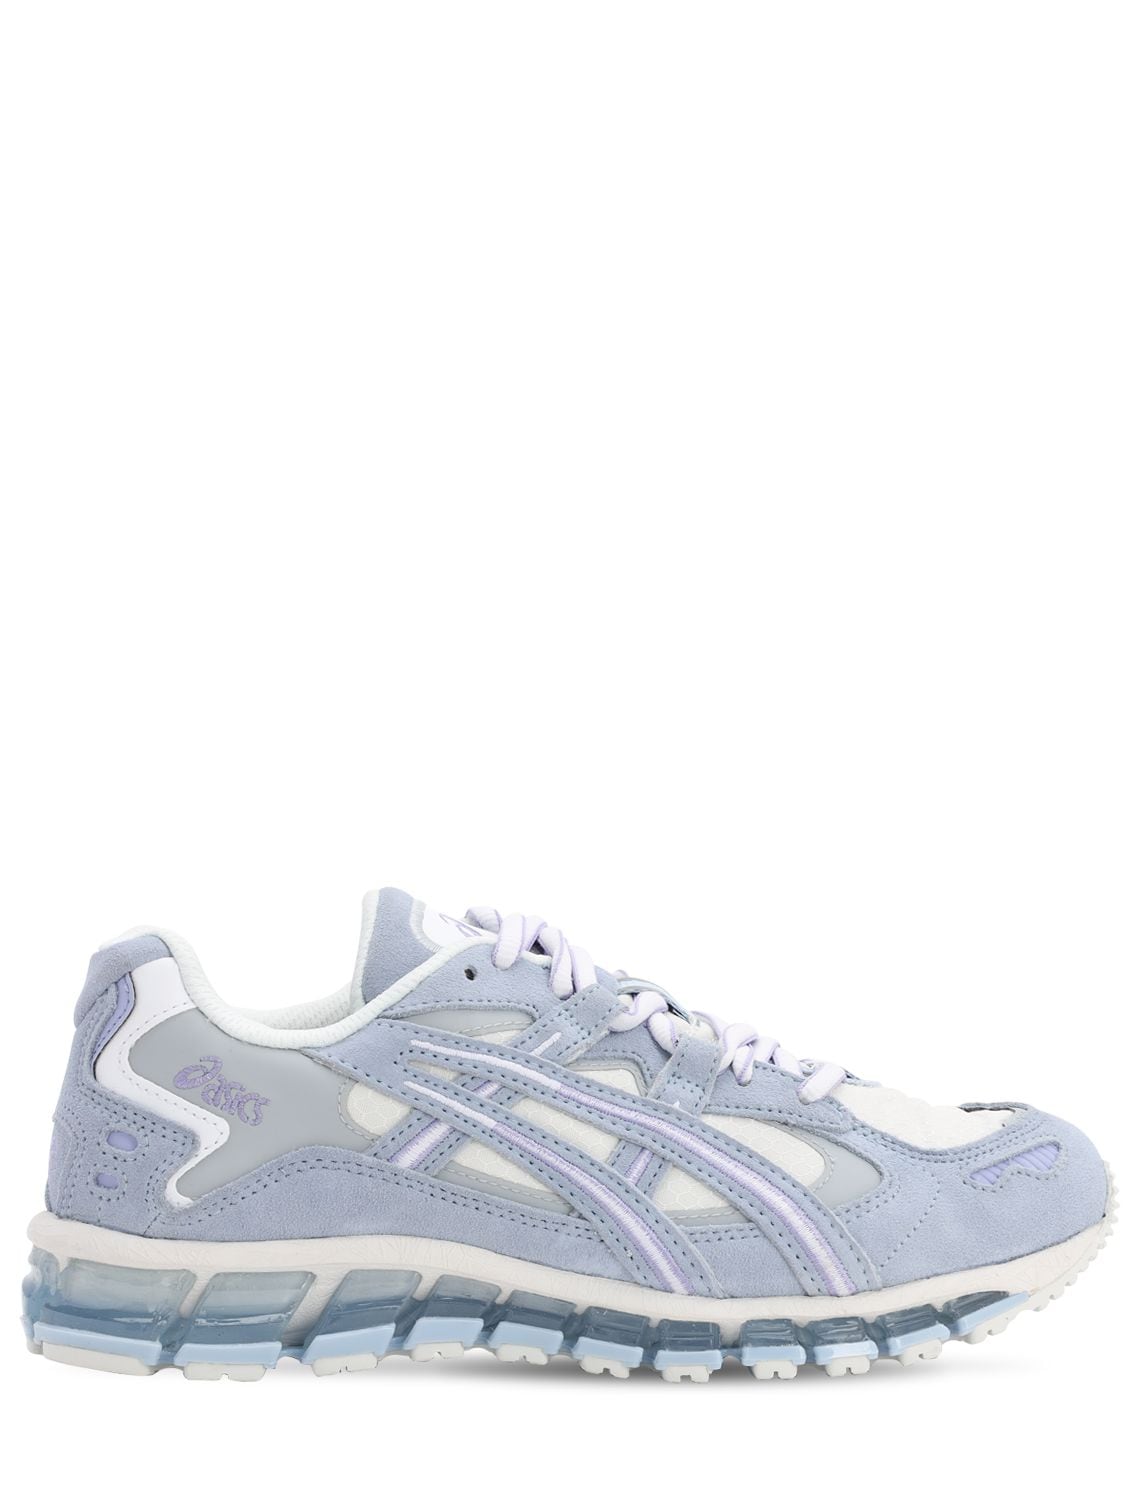 Asics Gel-kayano 5 360 Gore-tex Trainers In Cool Mist